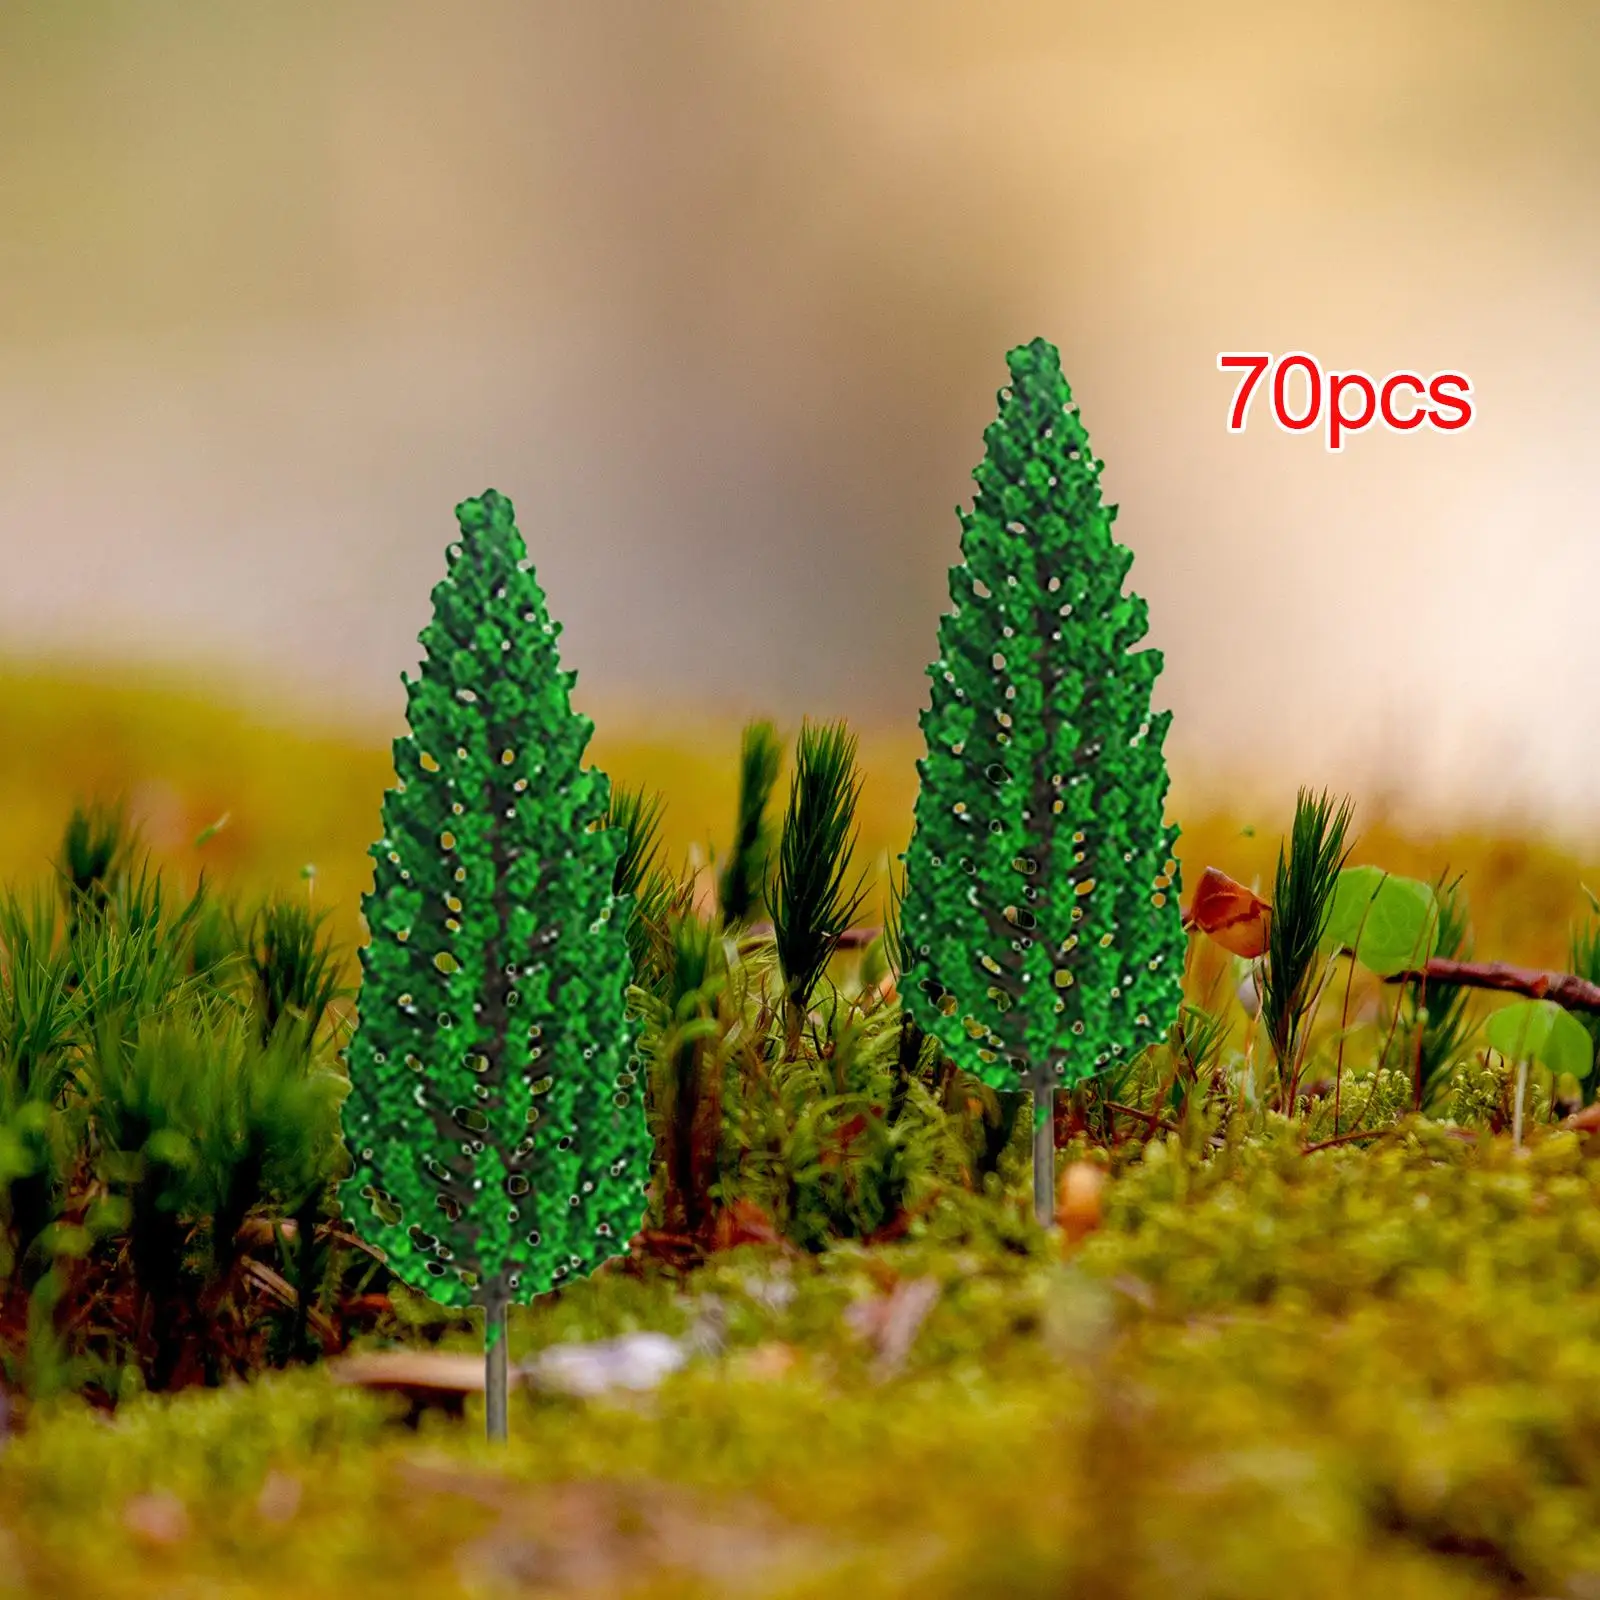 70 Pieces Scenery Tree 6cm Miniature Landscape Trees Diorama Tree Model Trees for DIY Crafts Railroad Scenery Layout Accessories